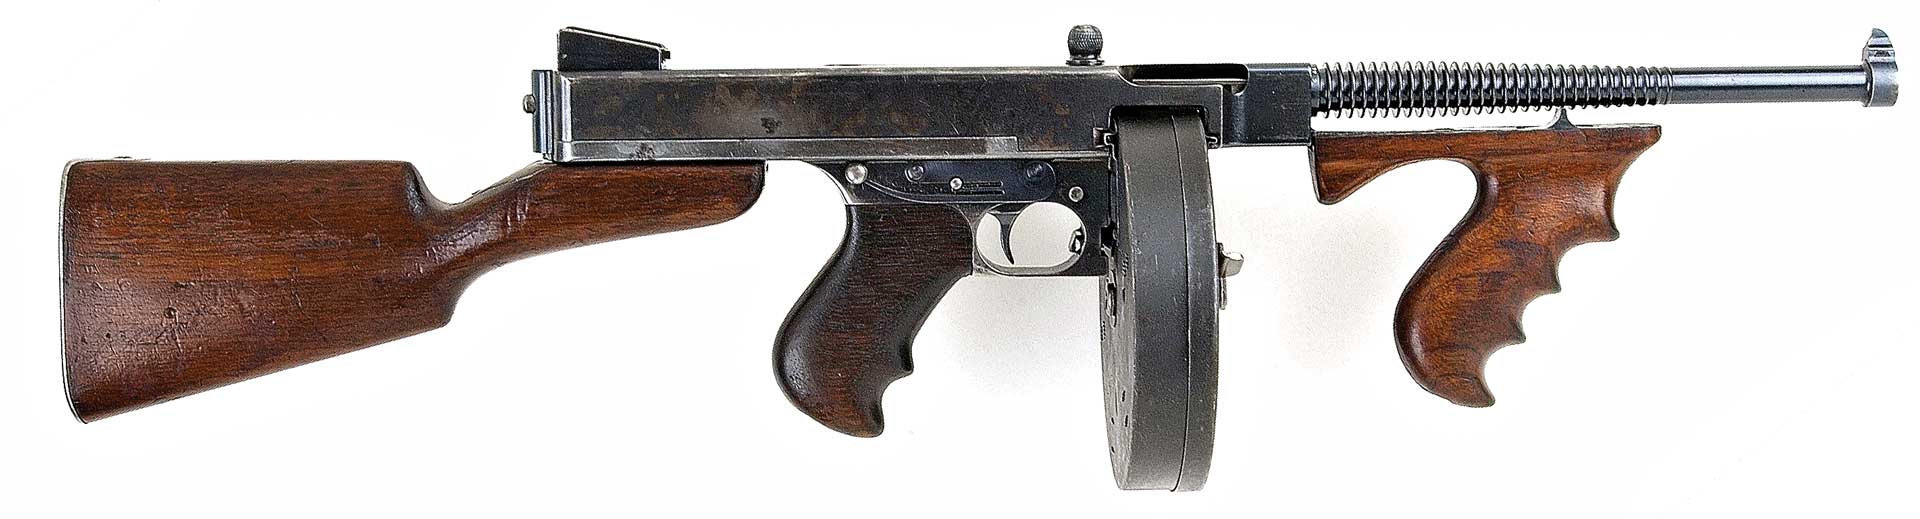 Originally a full-automatic-only gun, serial No. 17, was later modified to selective fire, and then sights and a buttstock were added to it.